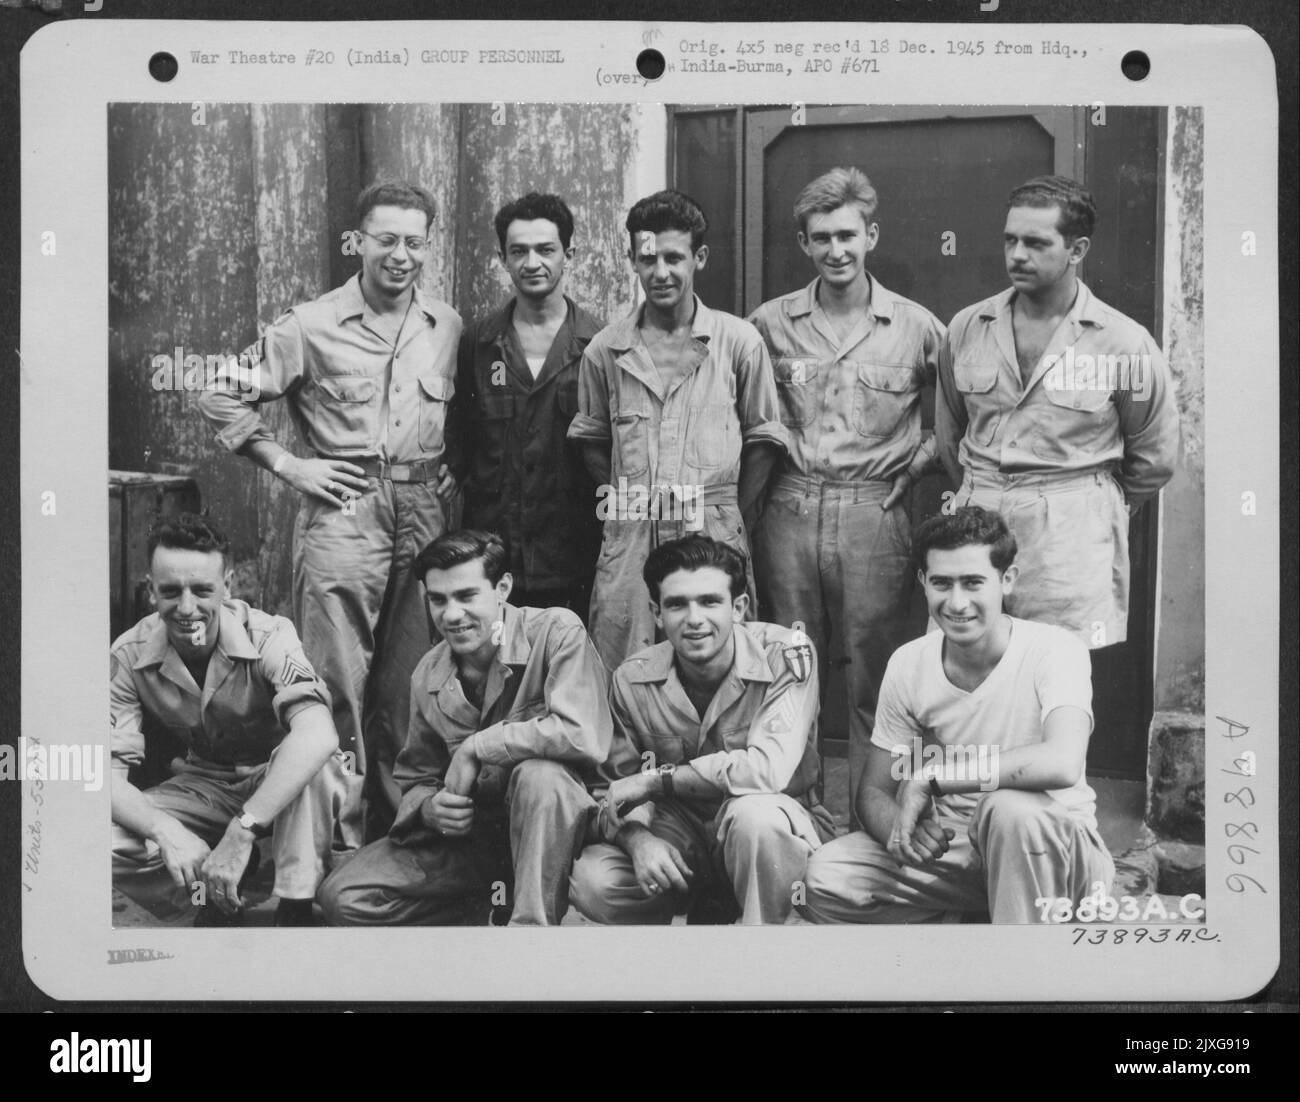 Members Of The 5317 Air Depot Group Pose For The Photographers At An Air Base In Barrackpore, India. Stock Photo